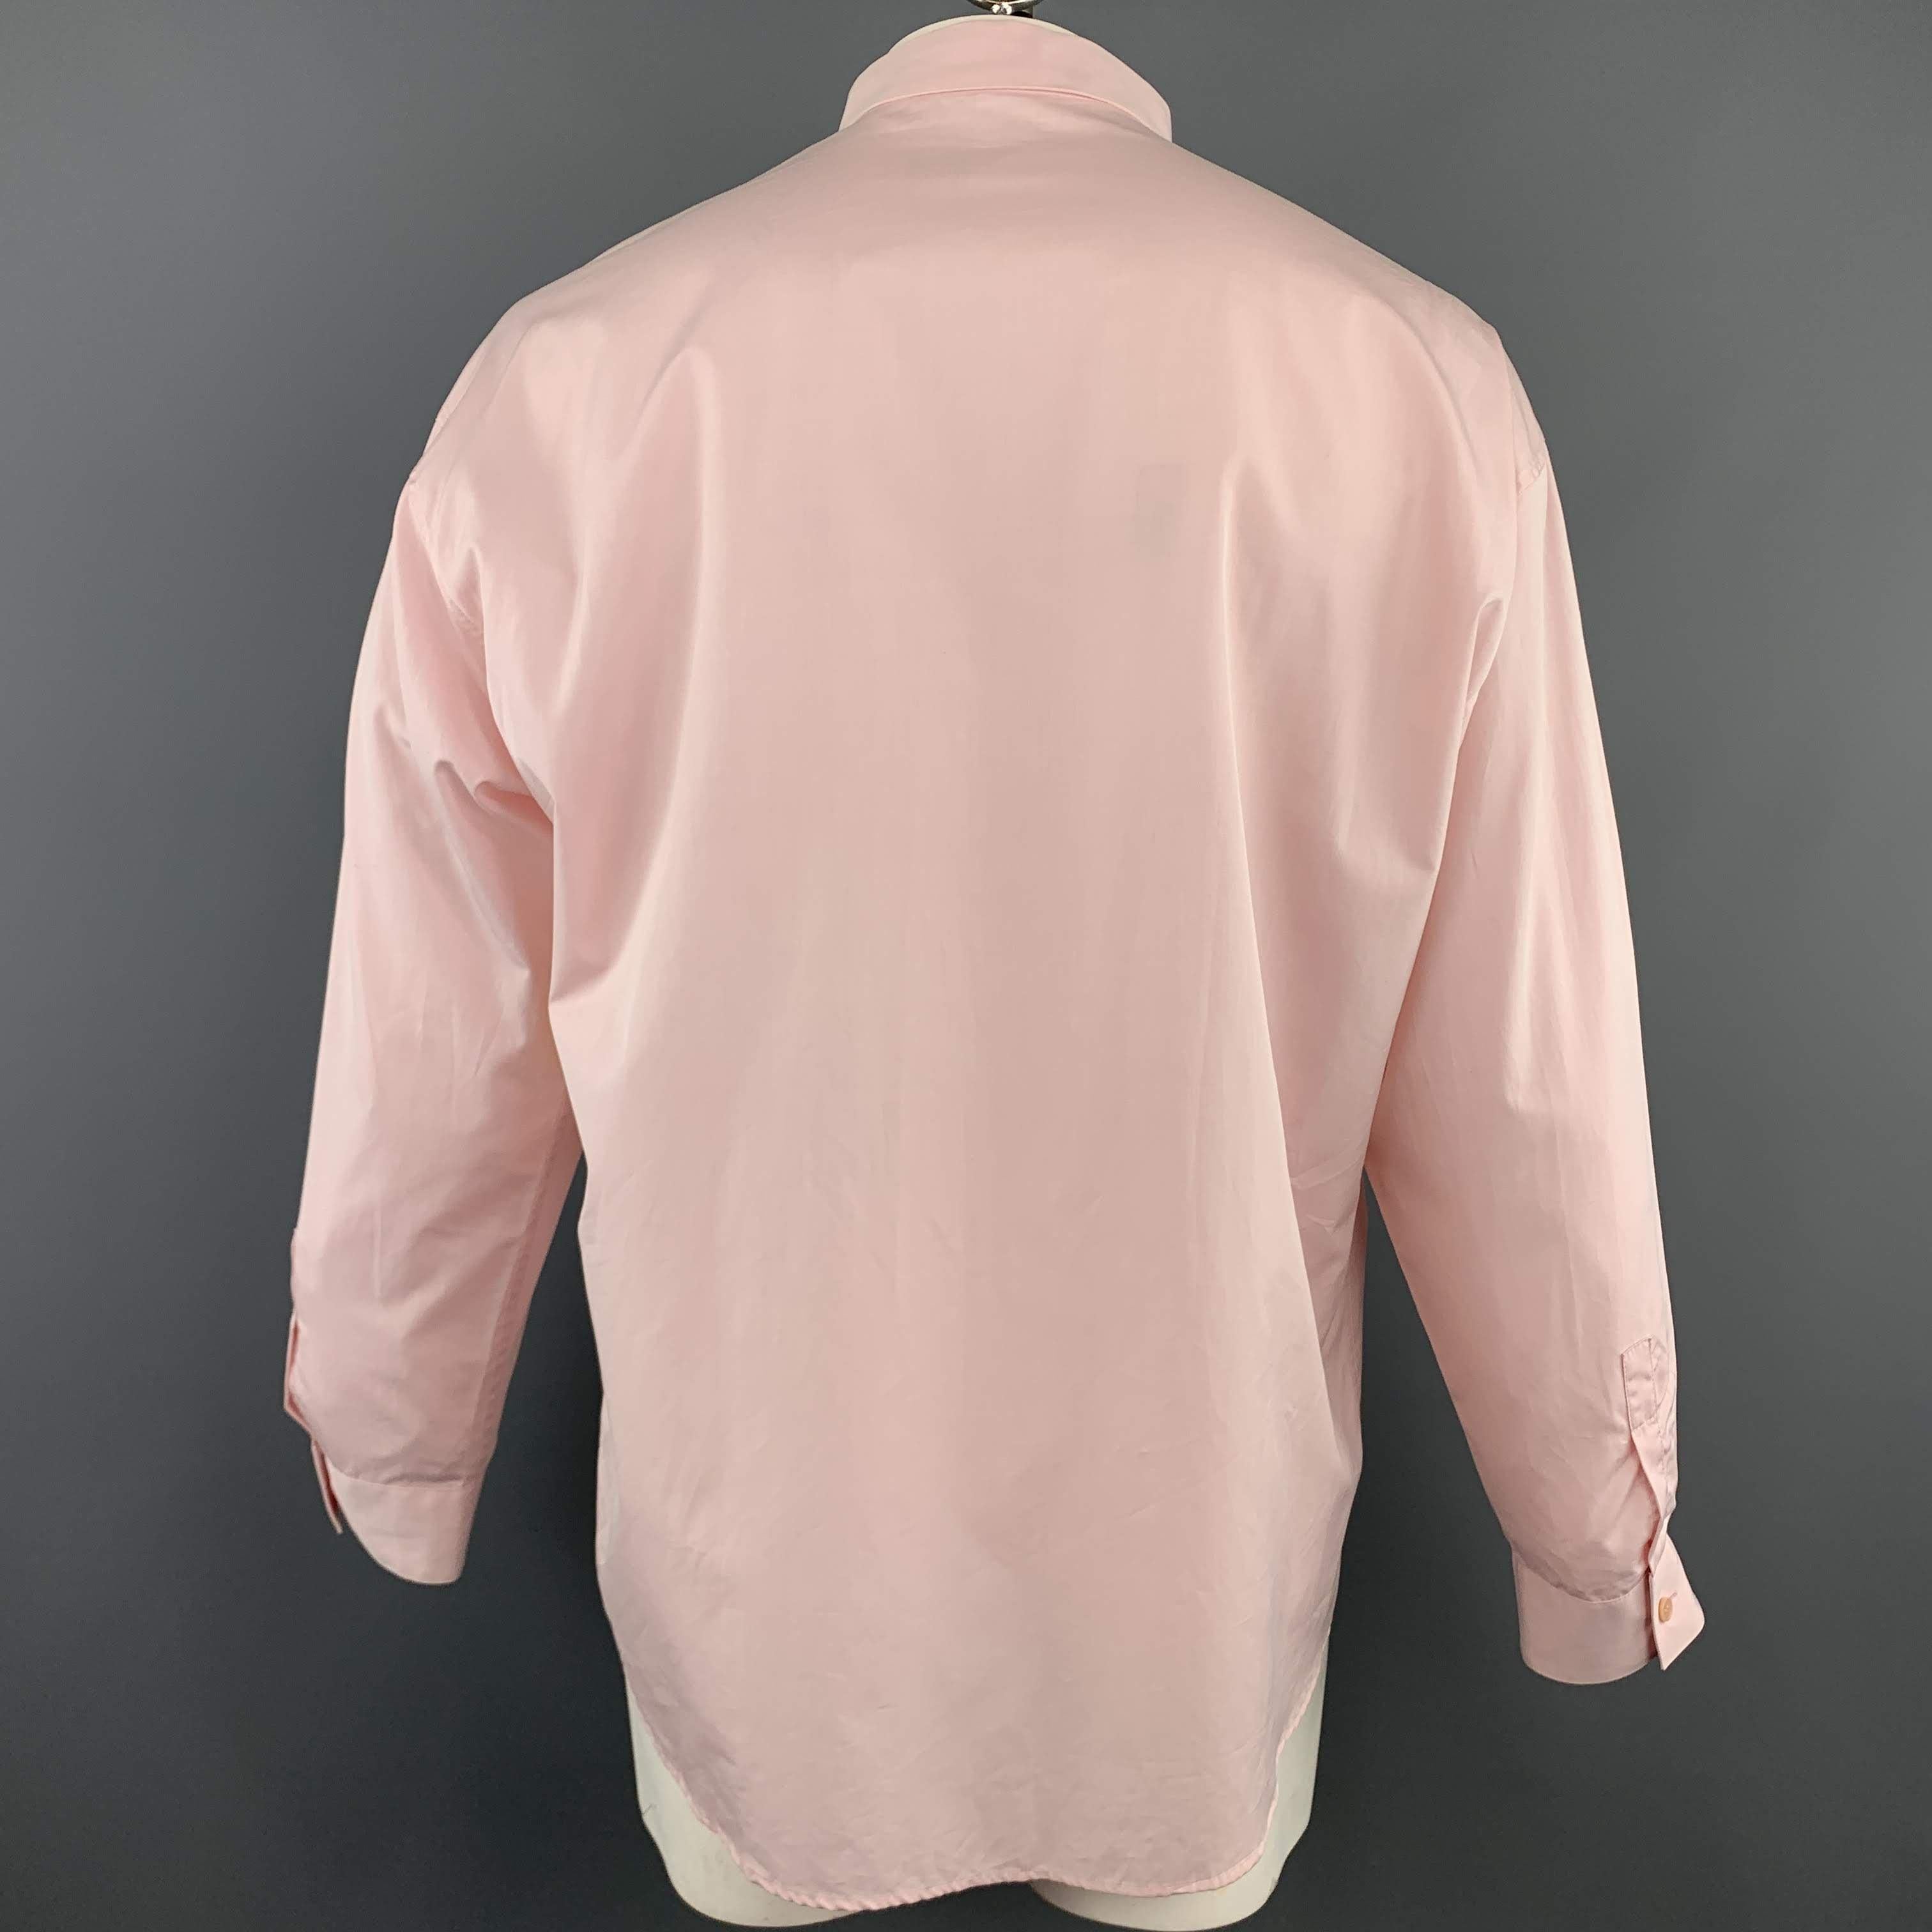 GIANNI VERSACE Size XL Light Pink Cotton Hidden Buttons Long Sleeve Shirt In Excellent Condition For Sale In San Francisco, CA